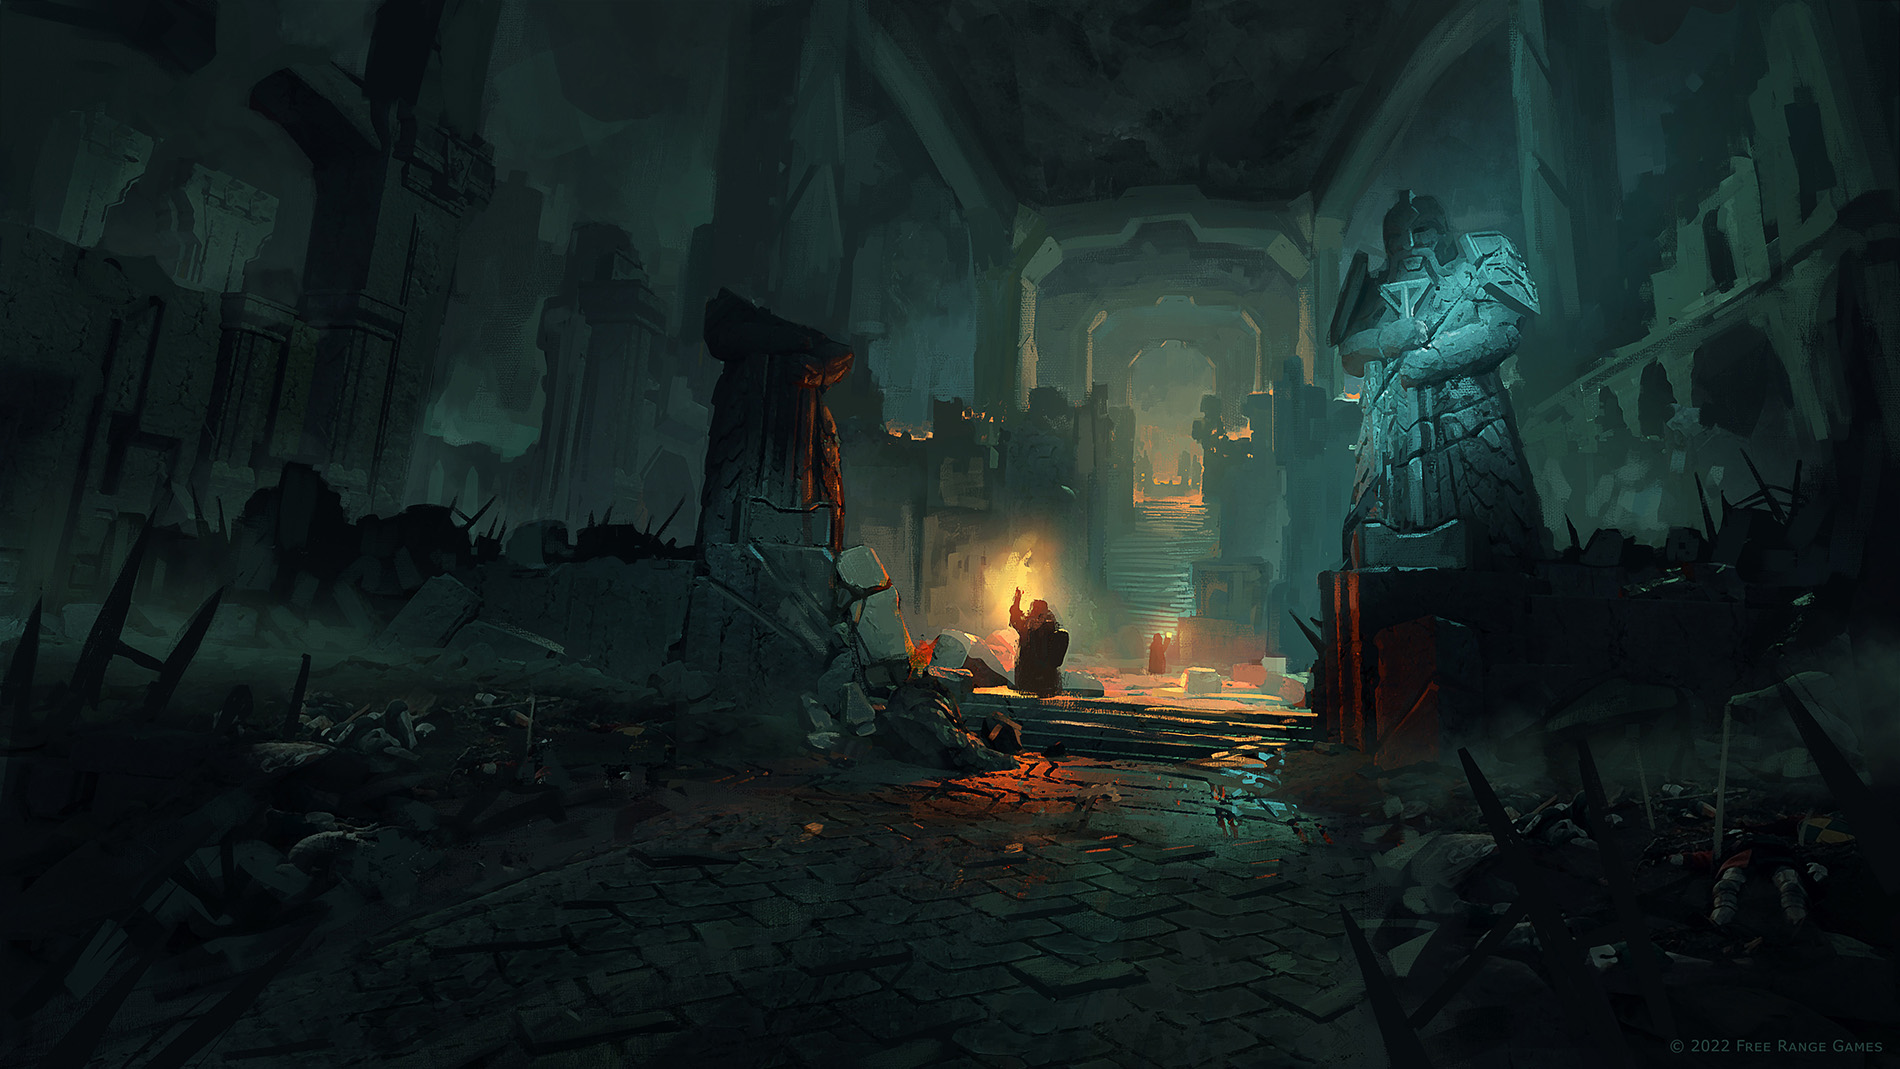 Concept art for Return to Moria showing caverns